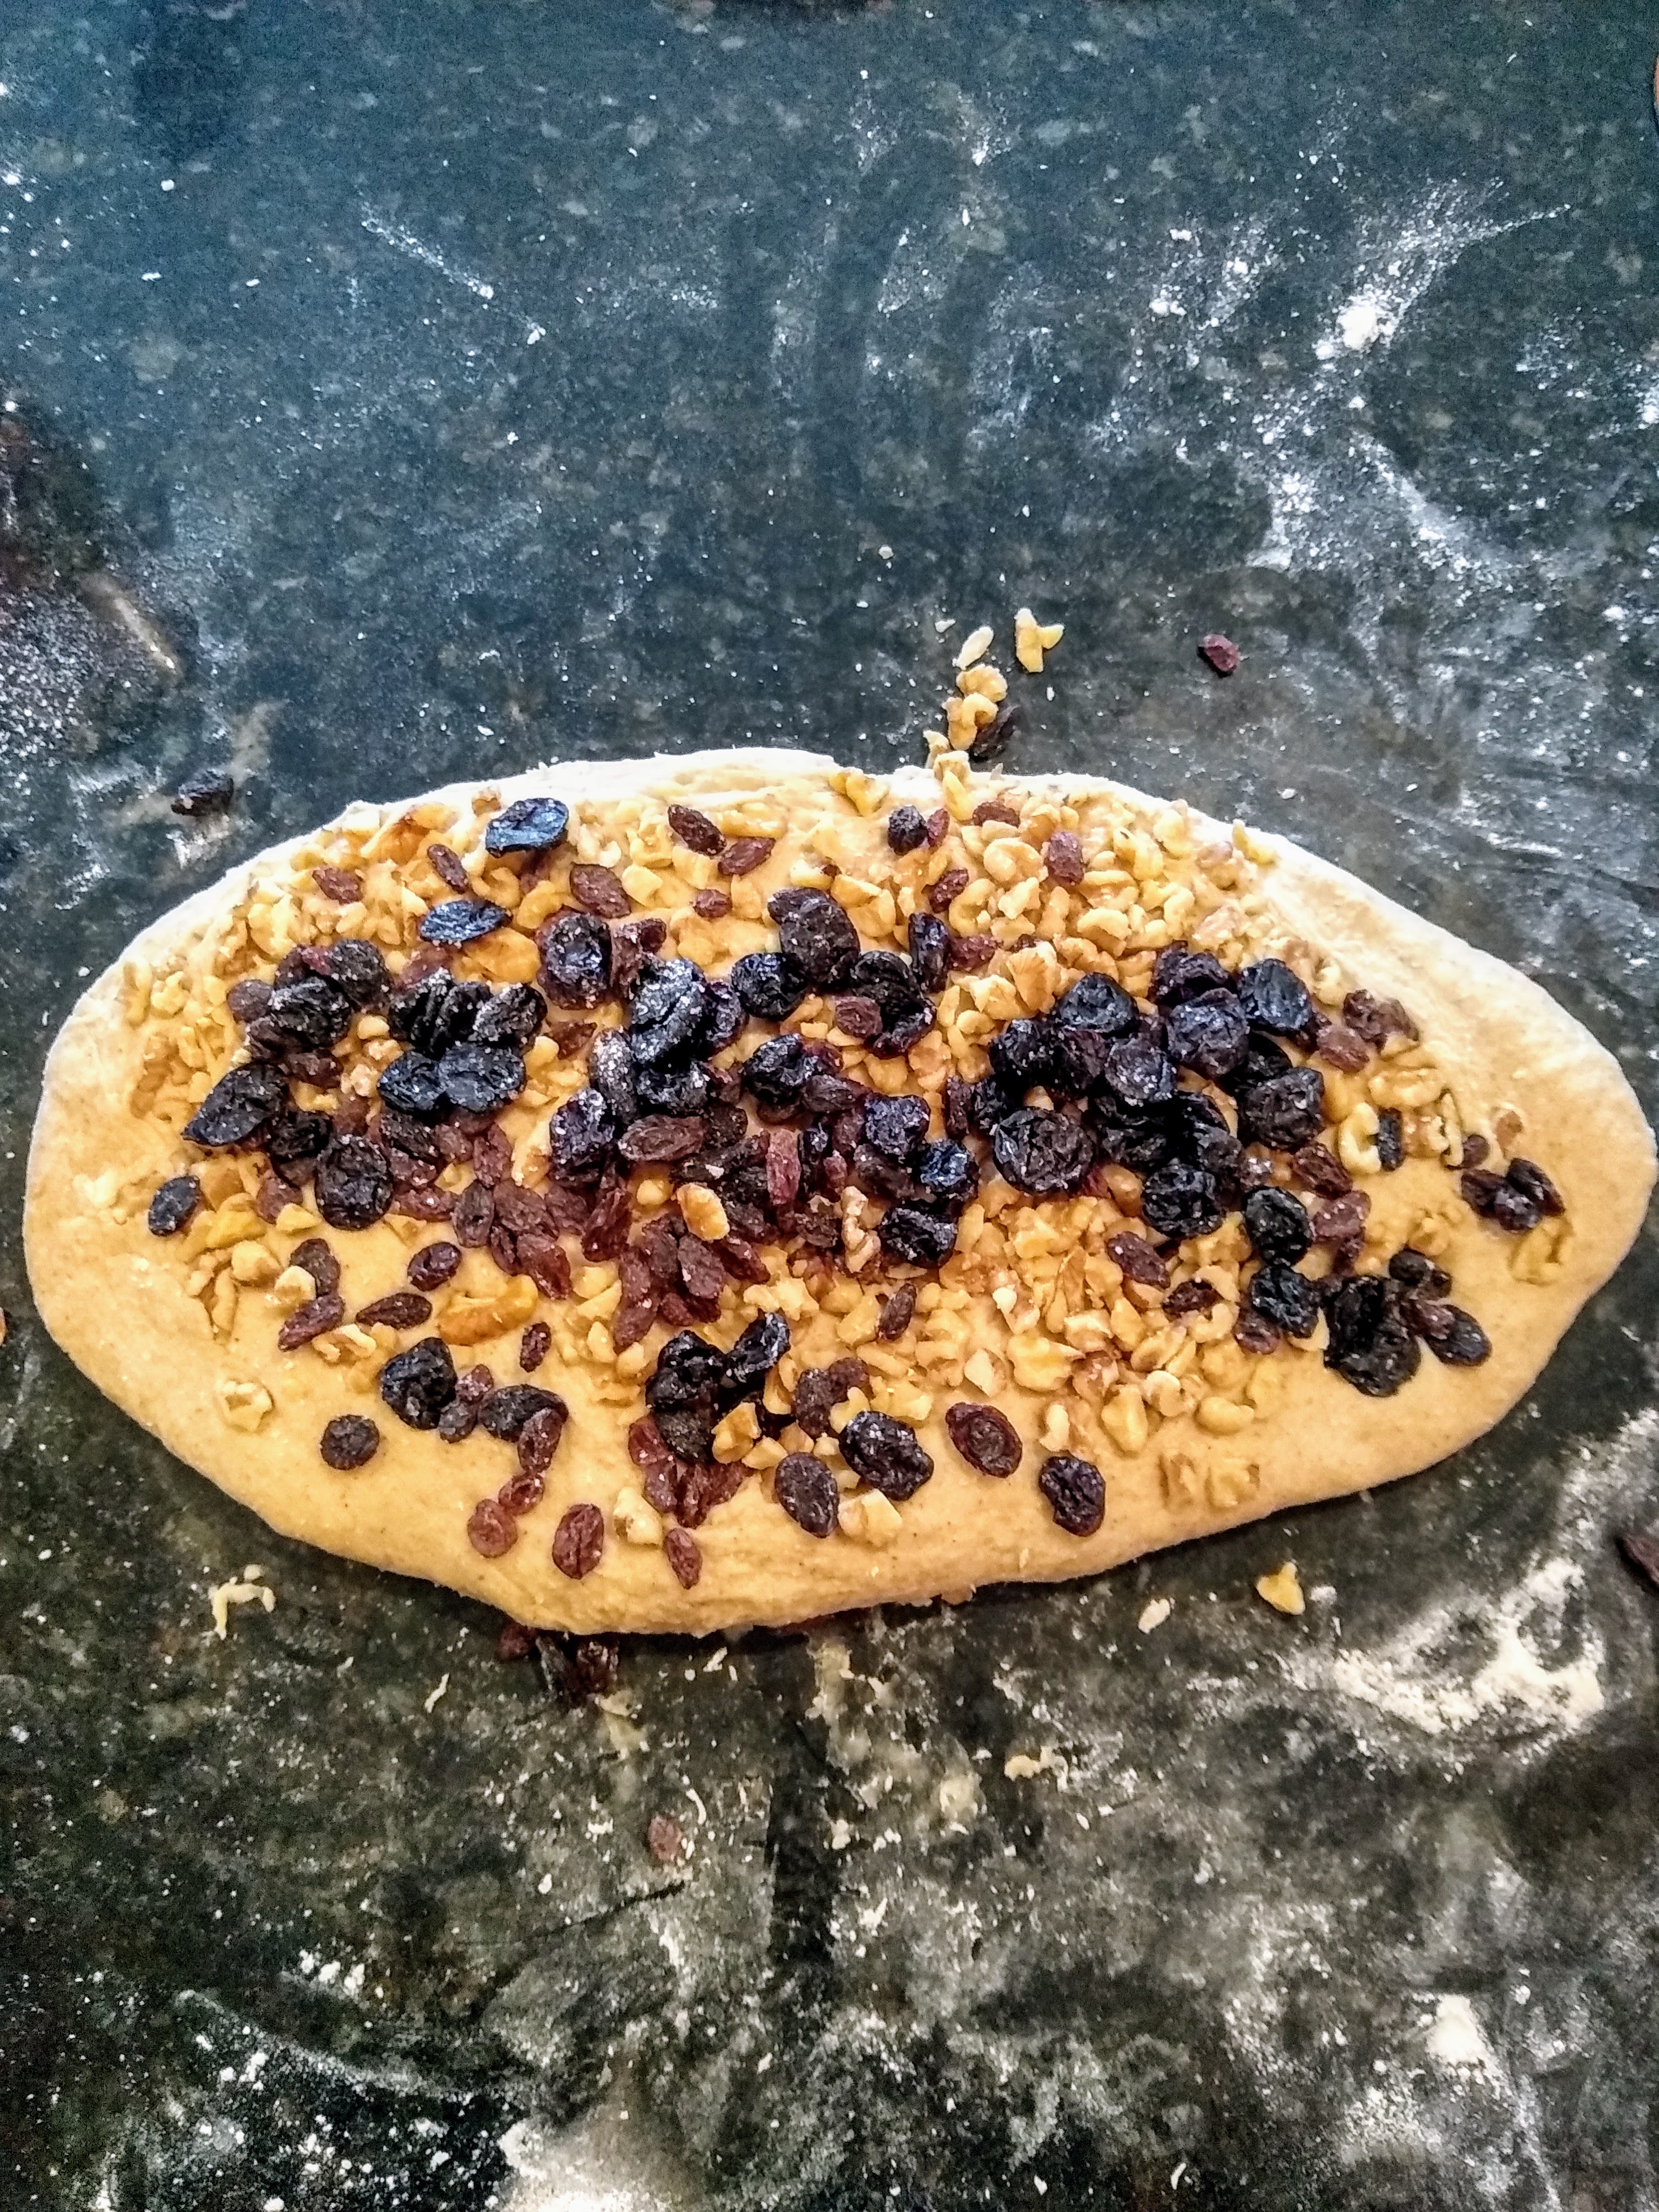 Artos bread dough with fruits and nuts